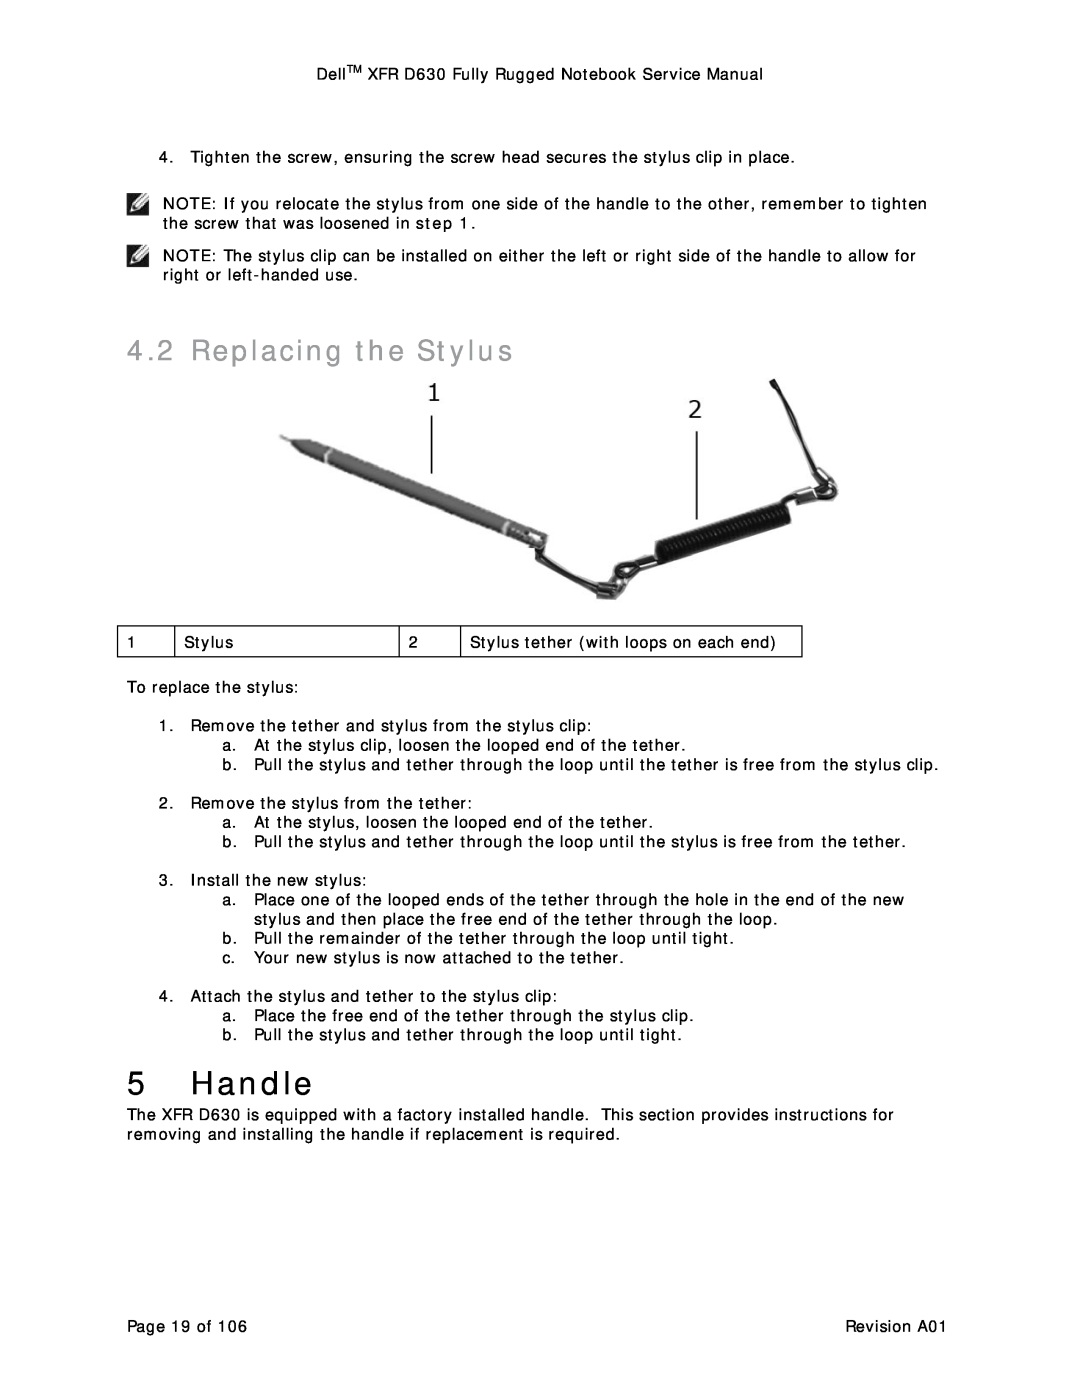 Dell D630 service manual Handle, Replacing the Stylus 